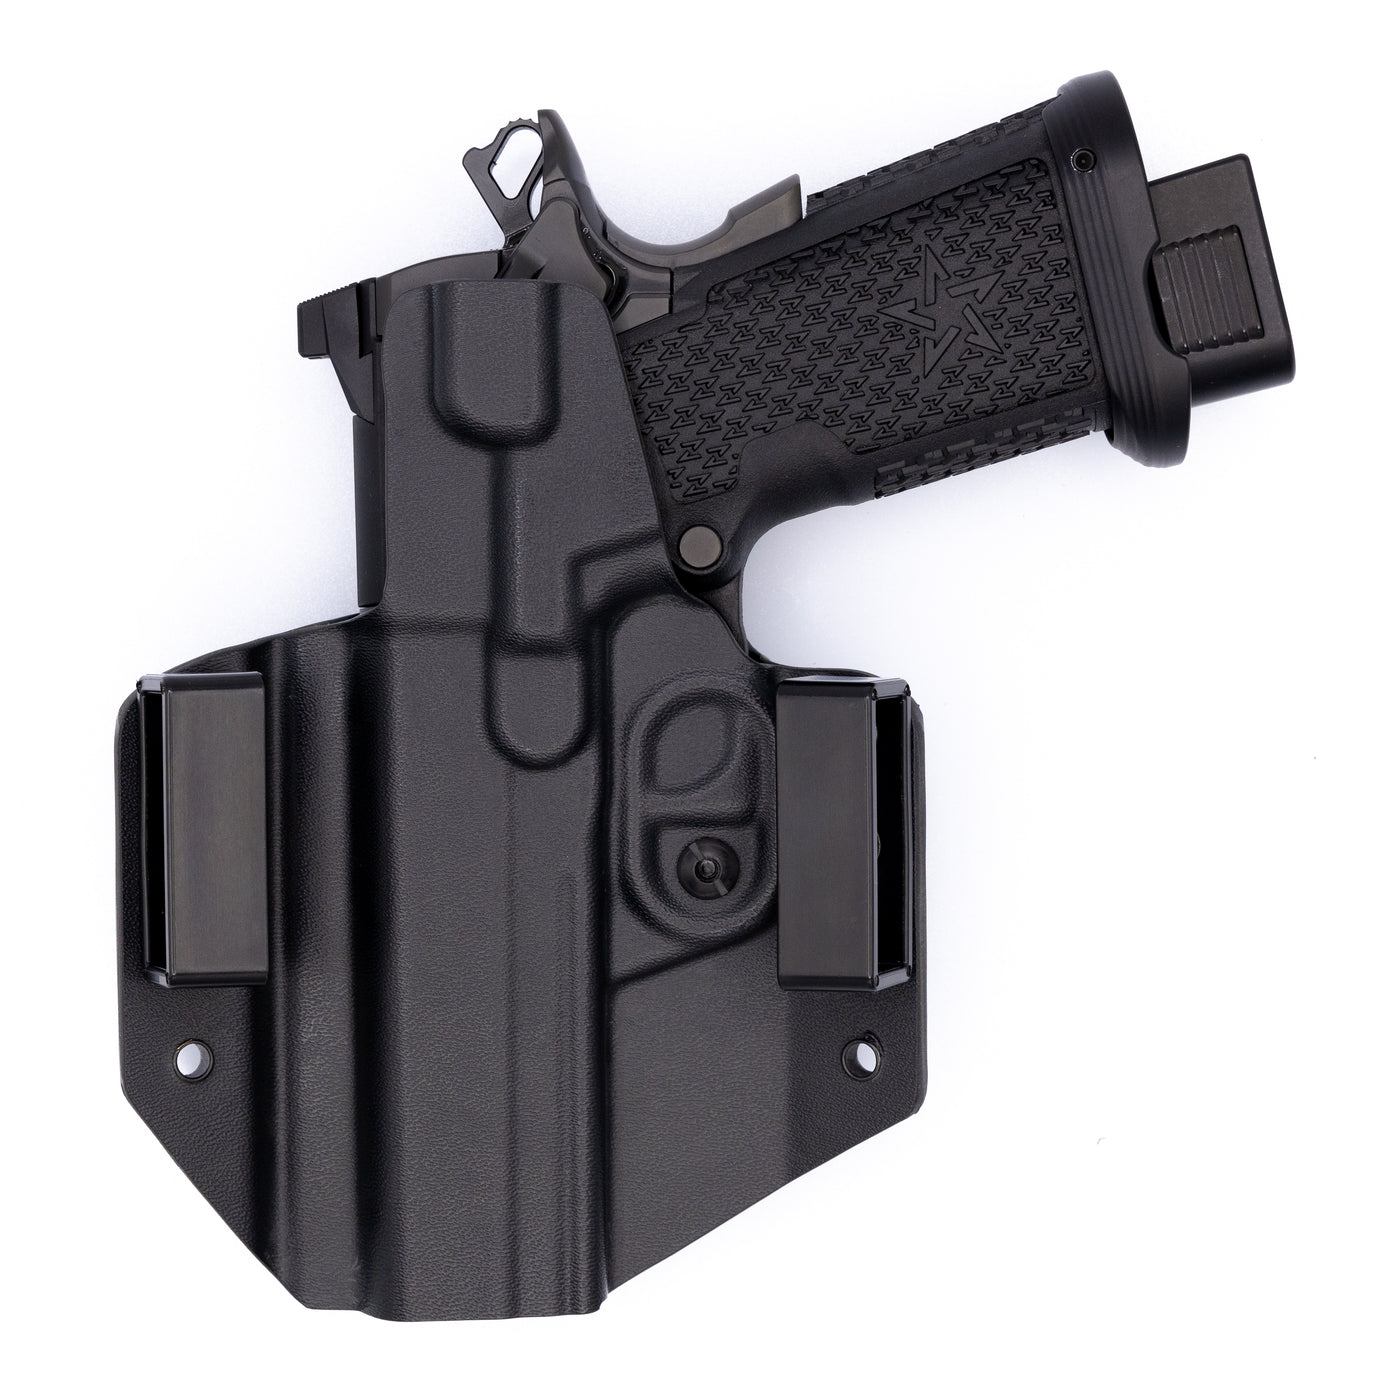 C&G Holsters OWB Covert holster for the Staccato P with extended mag